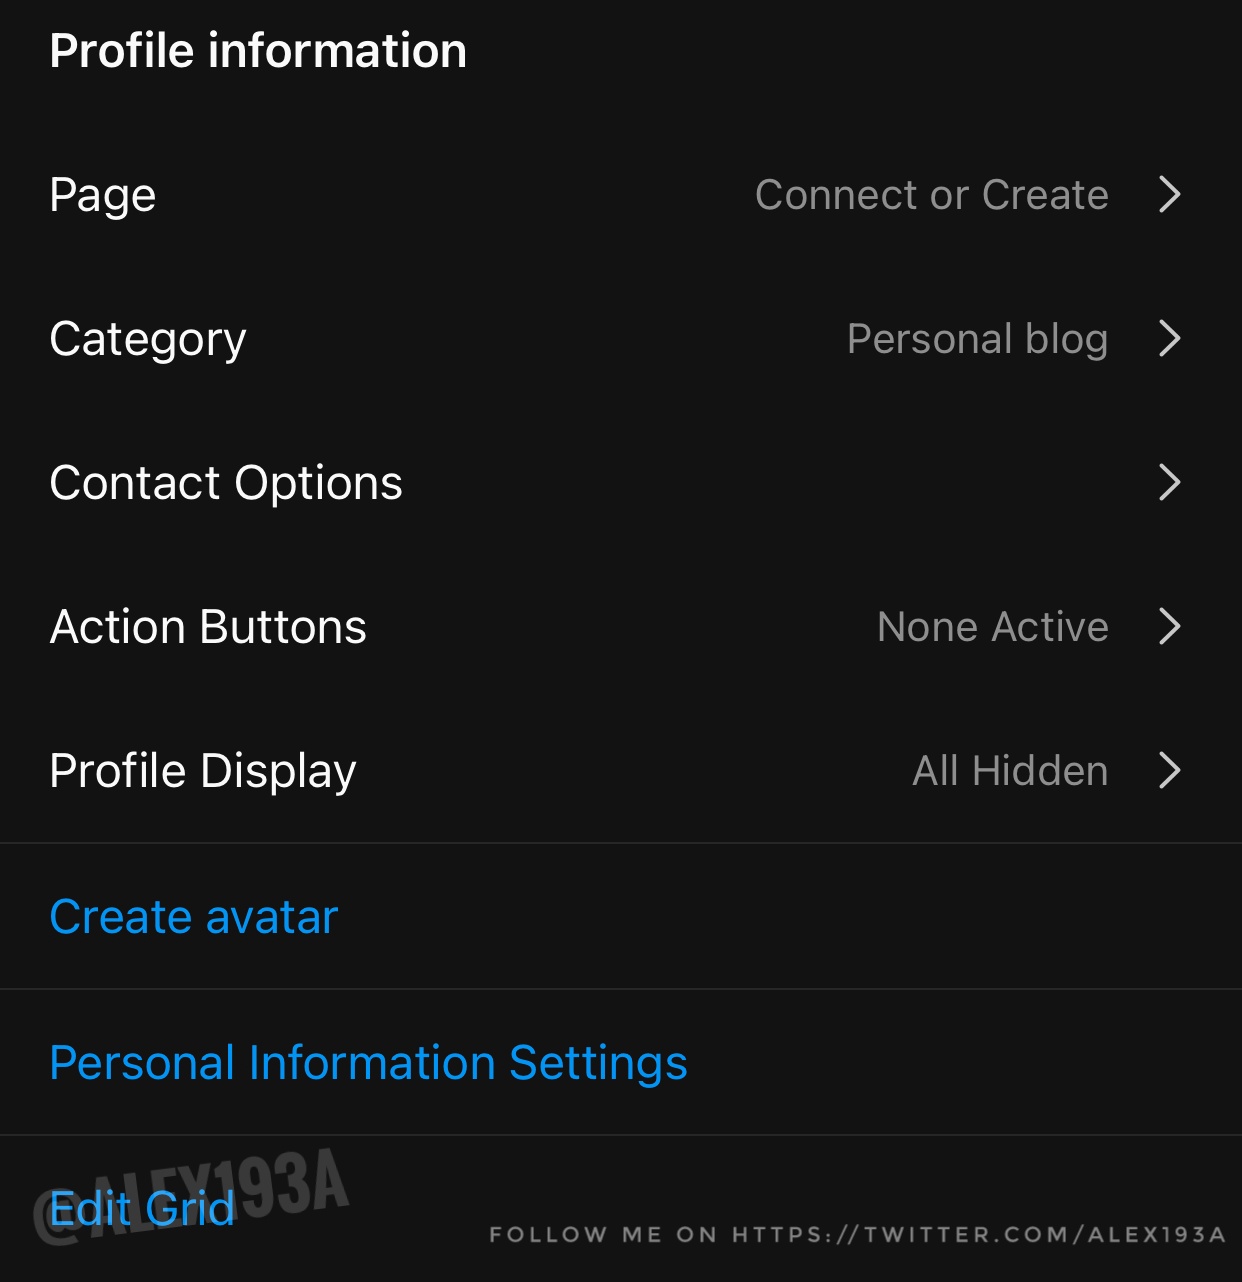 Profile information Connect or Create Page Personal blog Category 7 Contact Options None Active Action Buttons All Hidden Profile Display Create avatar Personal Information Settings Edtl Grid 93A FOLLOW ME ON HTTPS://TWITTER.cOM/ALEX193A